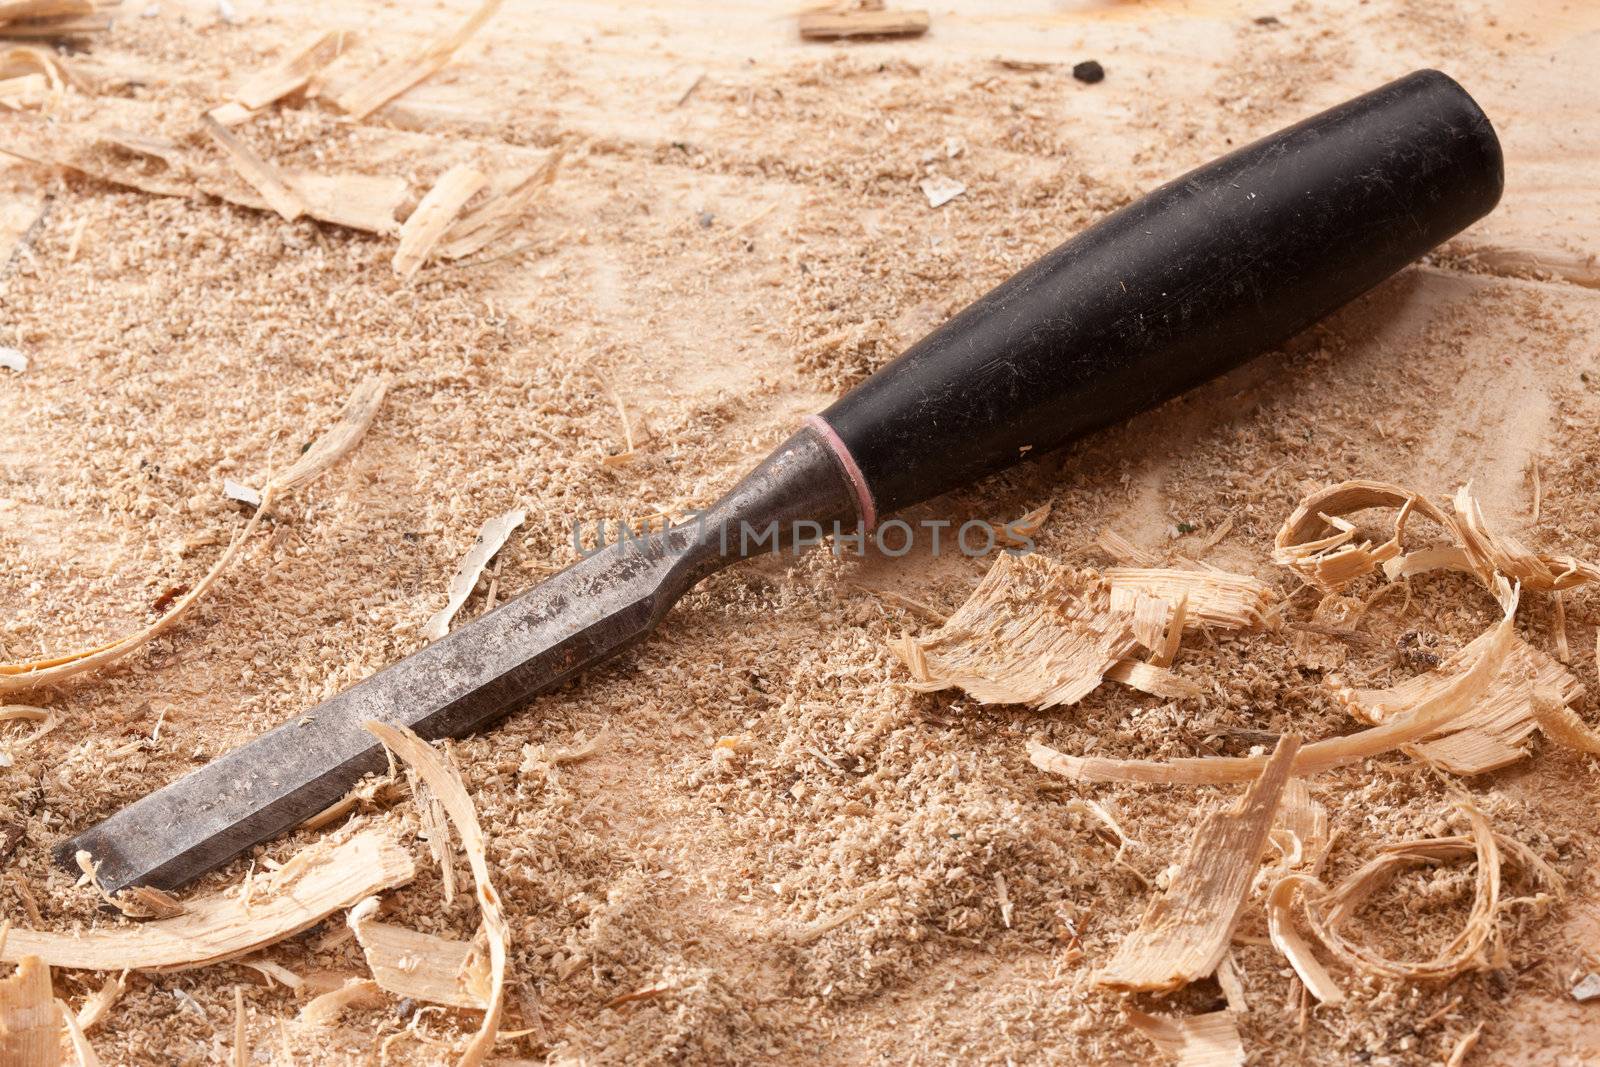 tools series: steel chisel on wooden plank with shaving